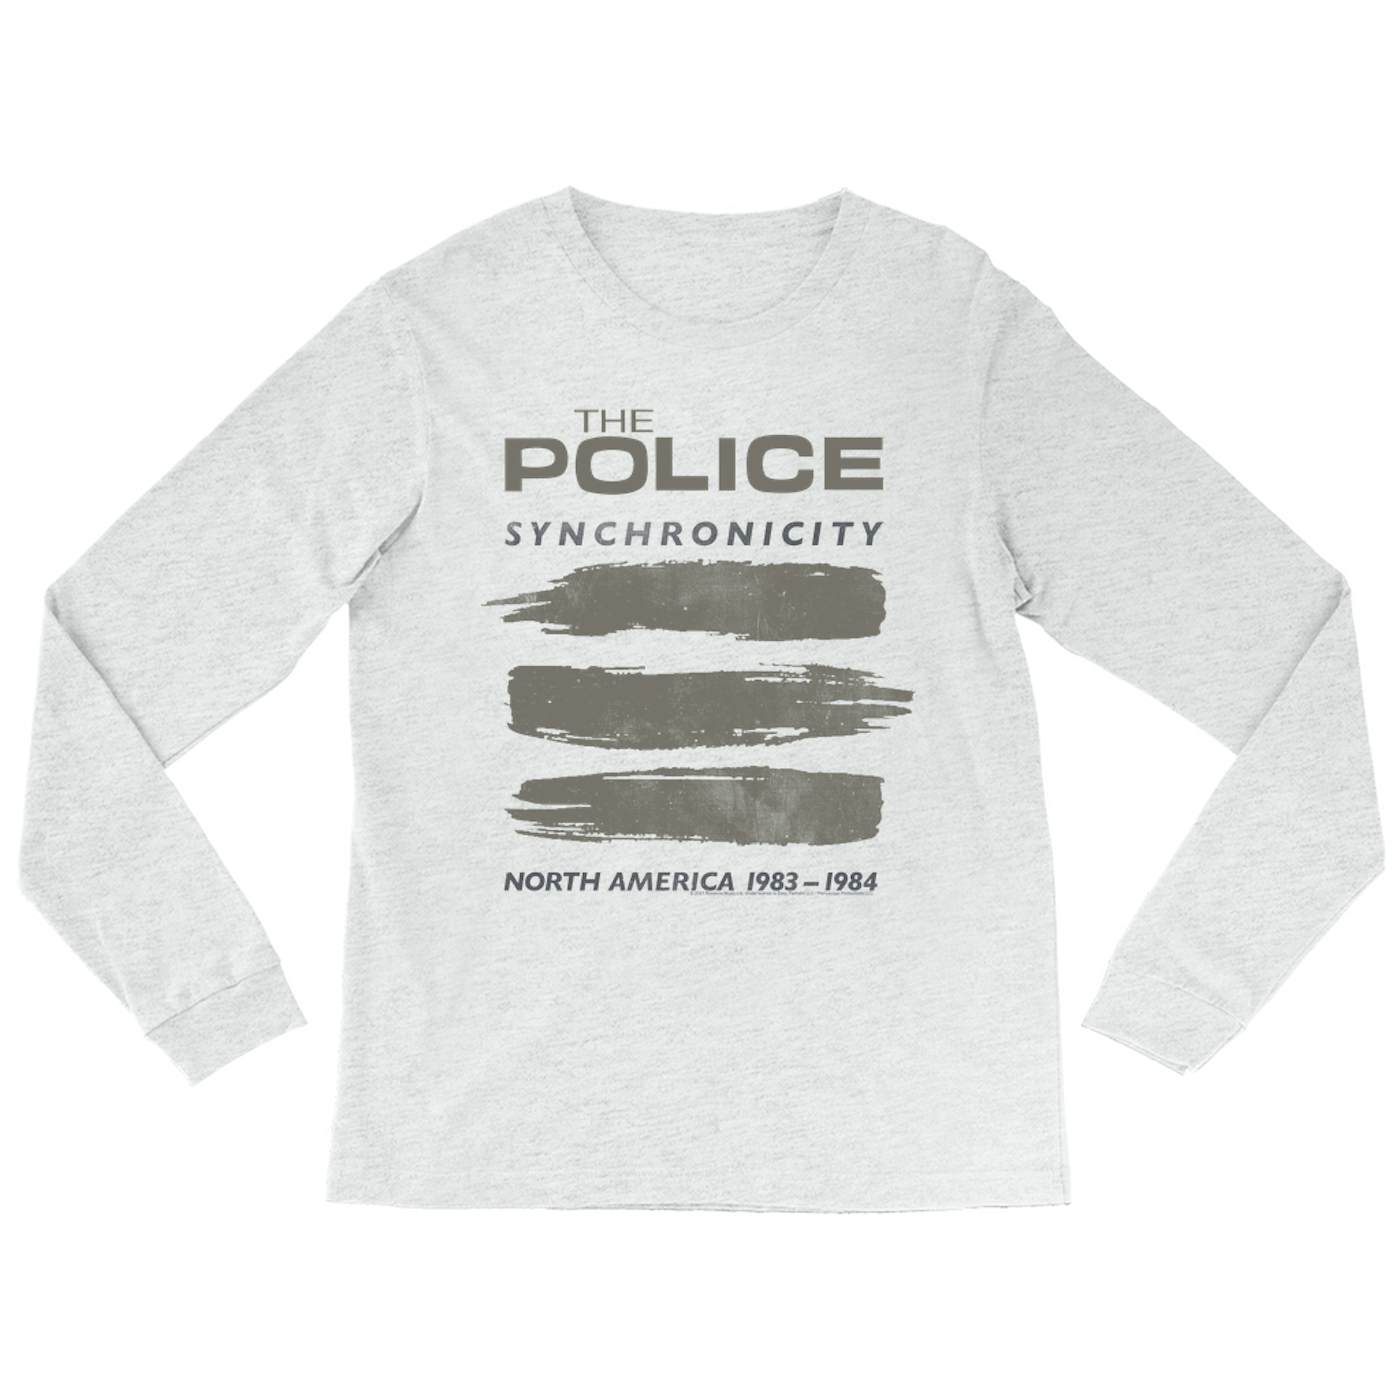 The Police Heather Long Sleeve Shirt | Synchronicity North America Tour 1983 - 1984 The Police Shirt